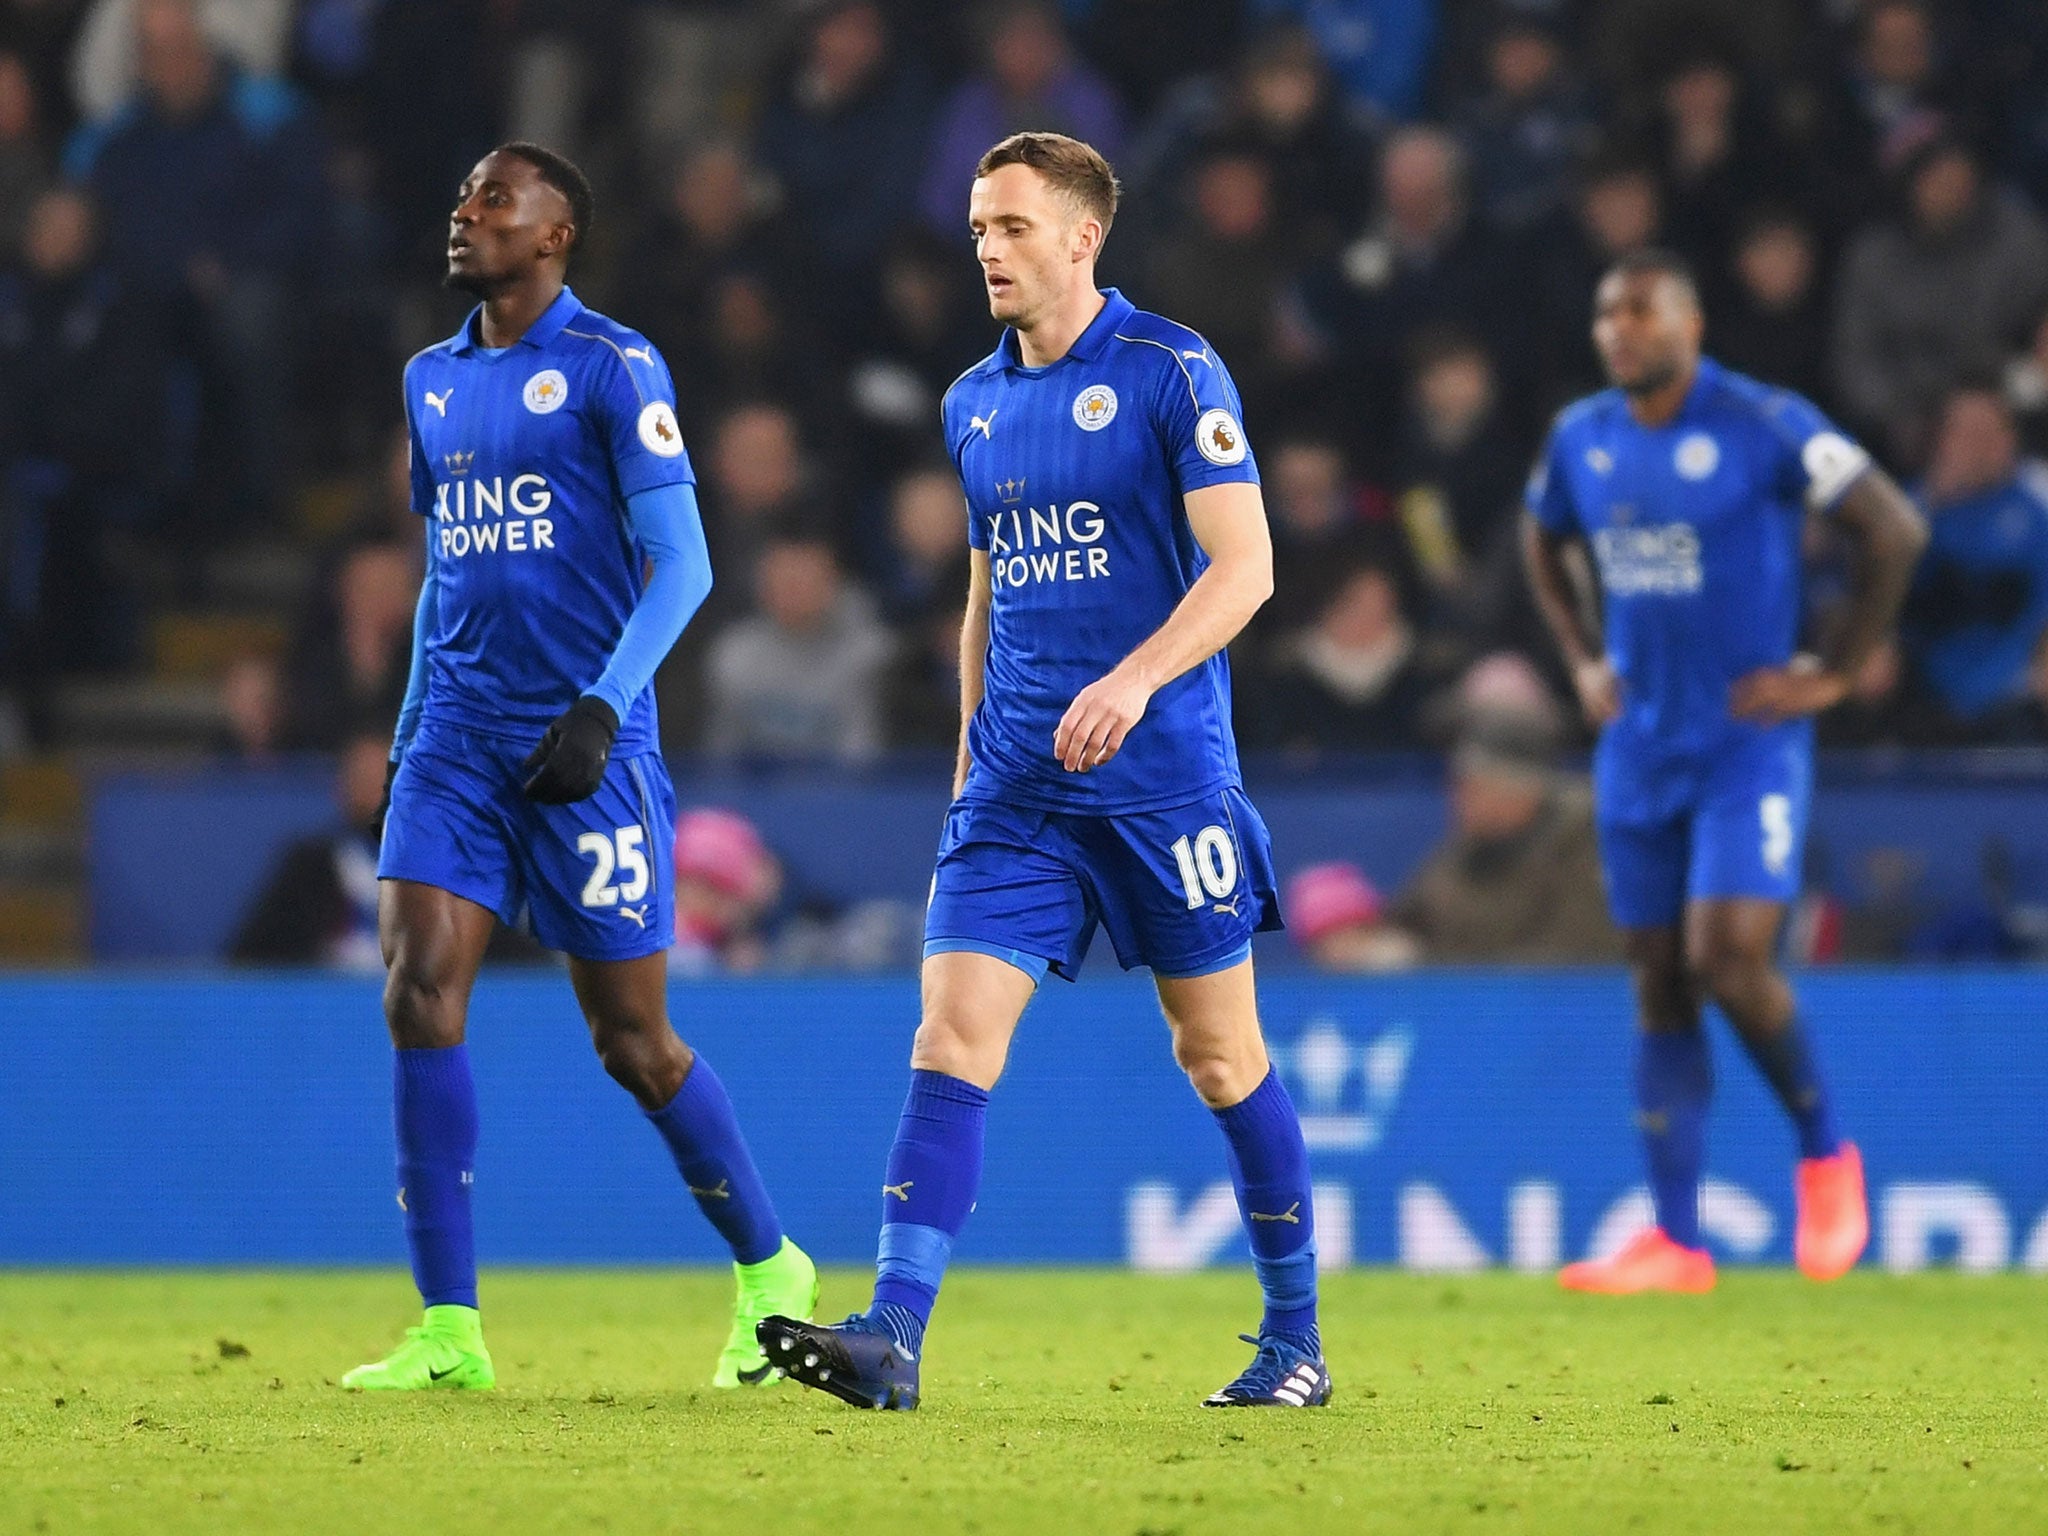 Leicester are without a win in 2017